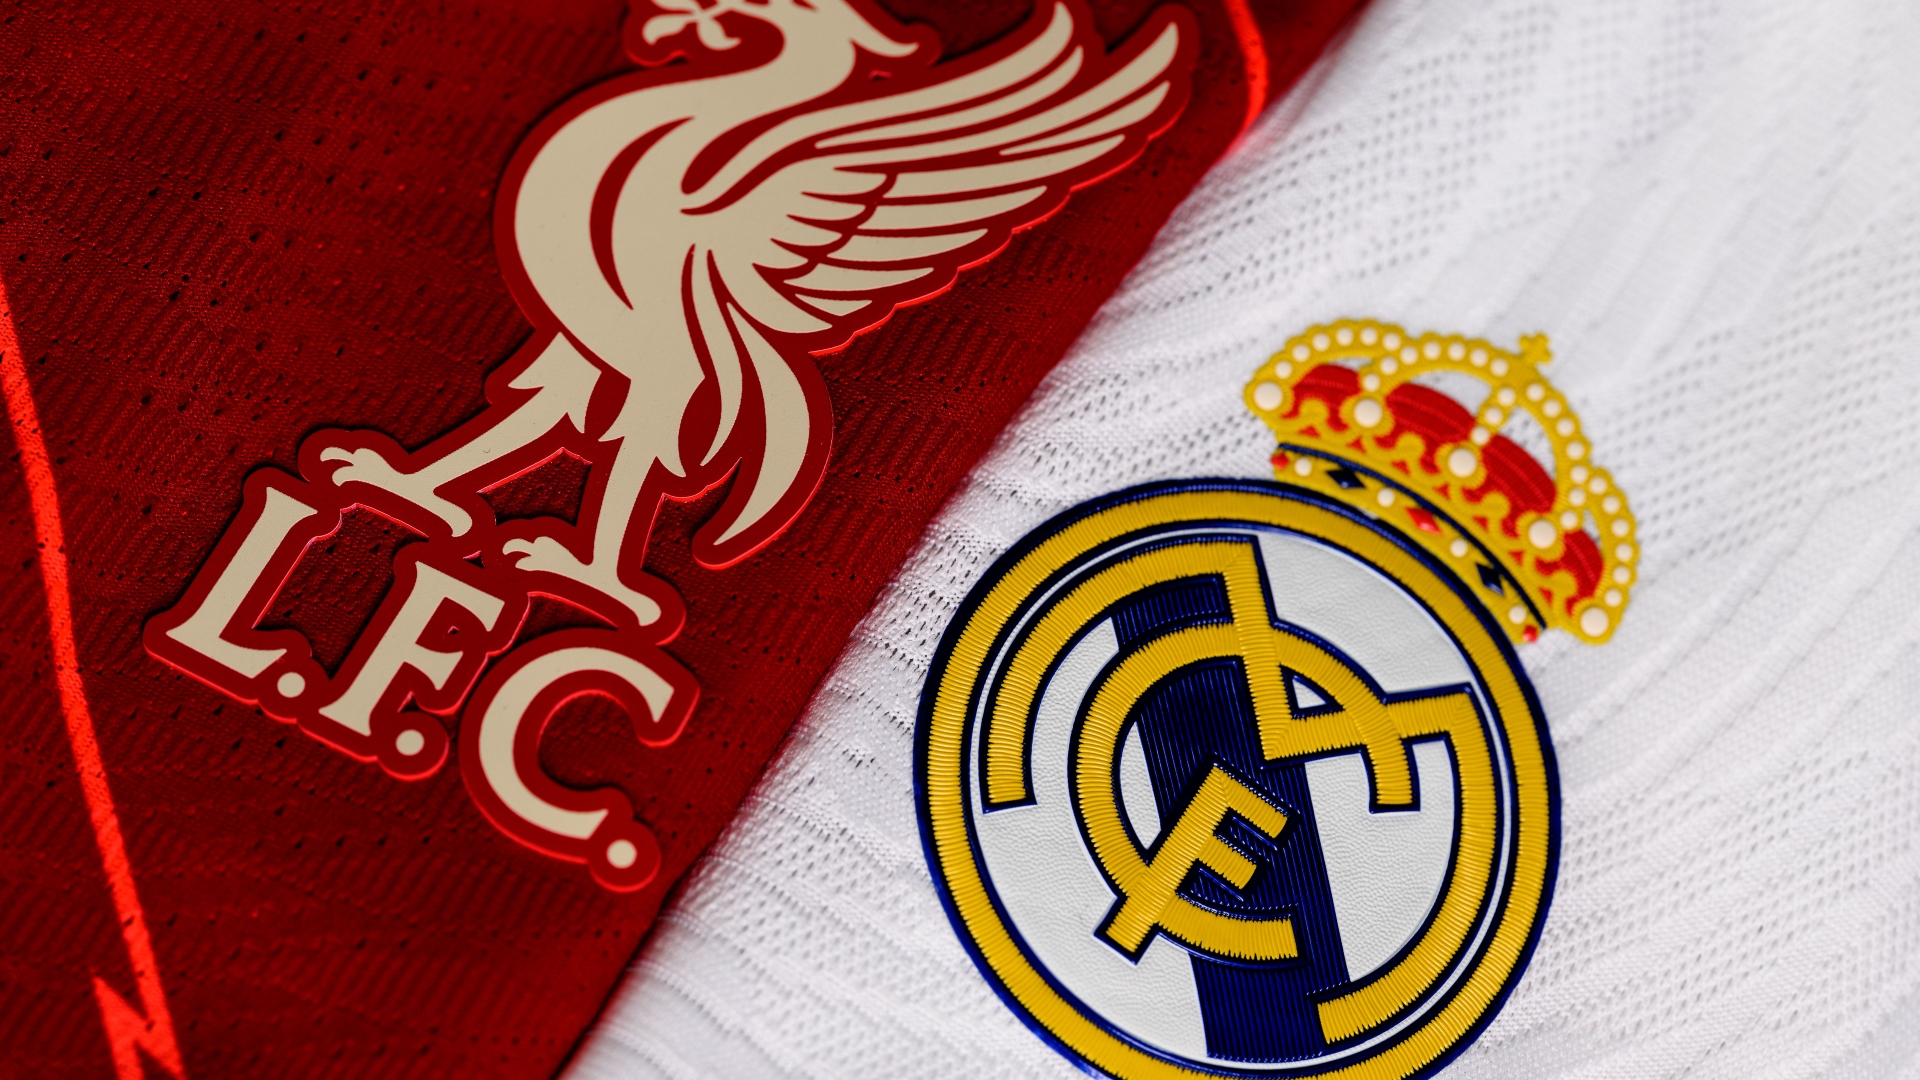 UEFA Champions League final kickoff time 2022: What time is Liverpool vs. Real Madrid?